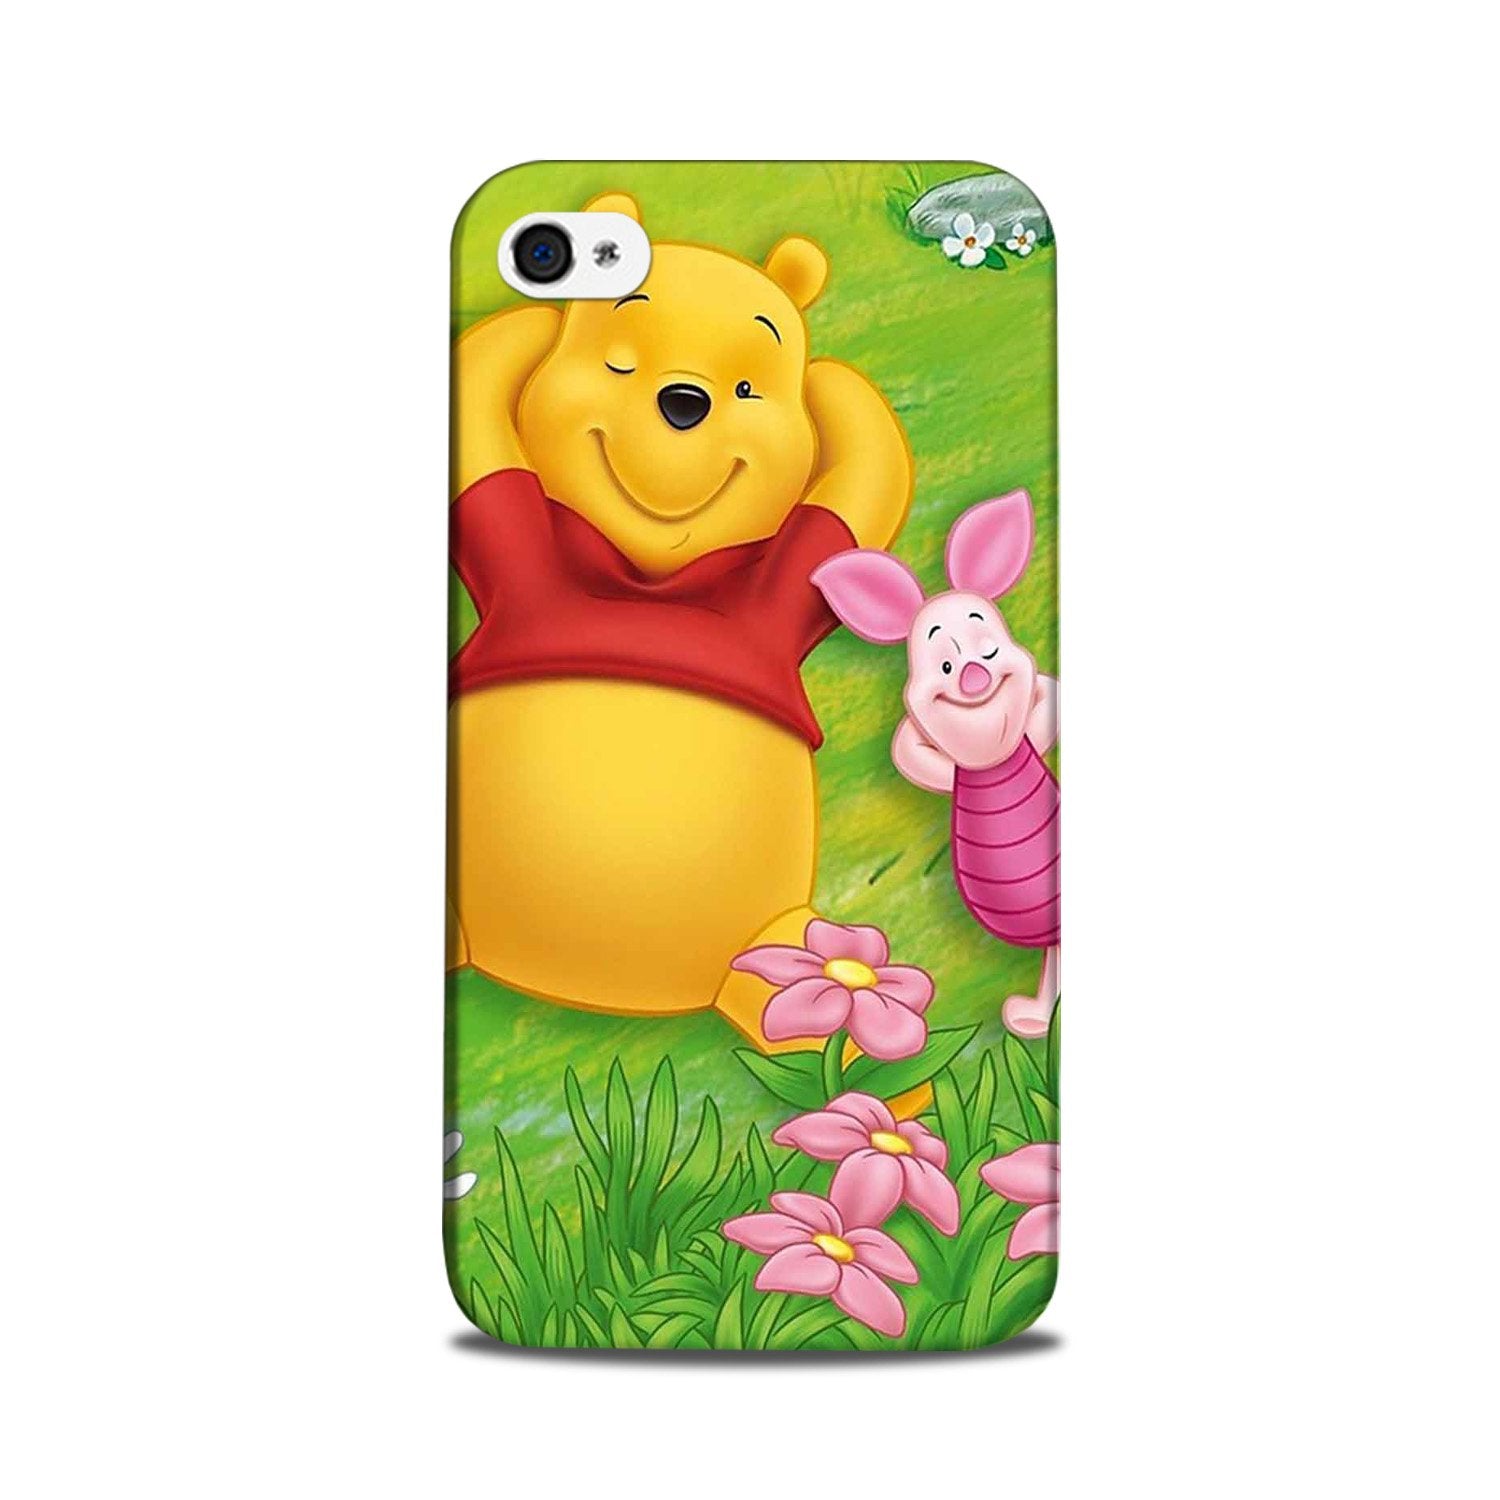 Winnie The Pooh Mobile Back Case for iPhone 5/ 5s(Design - 348)